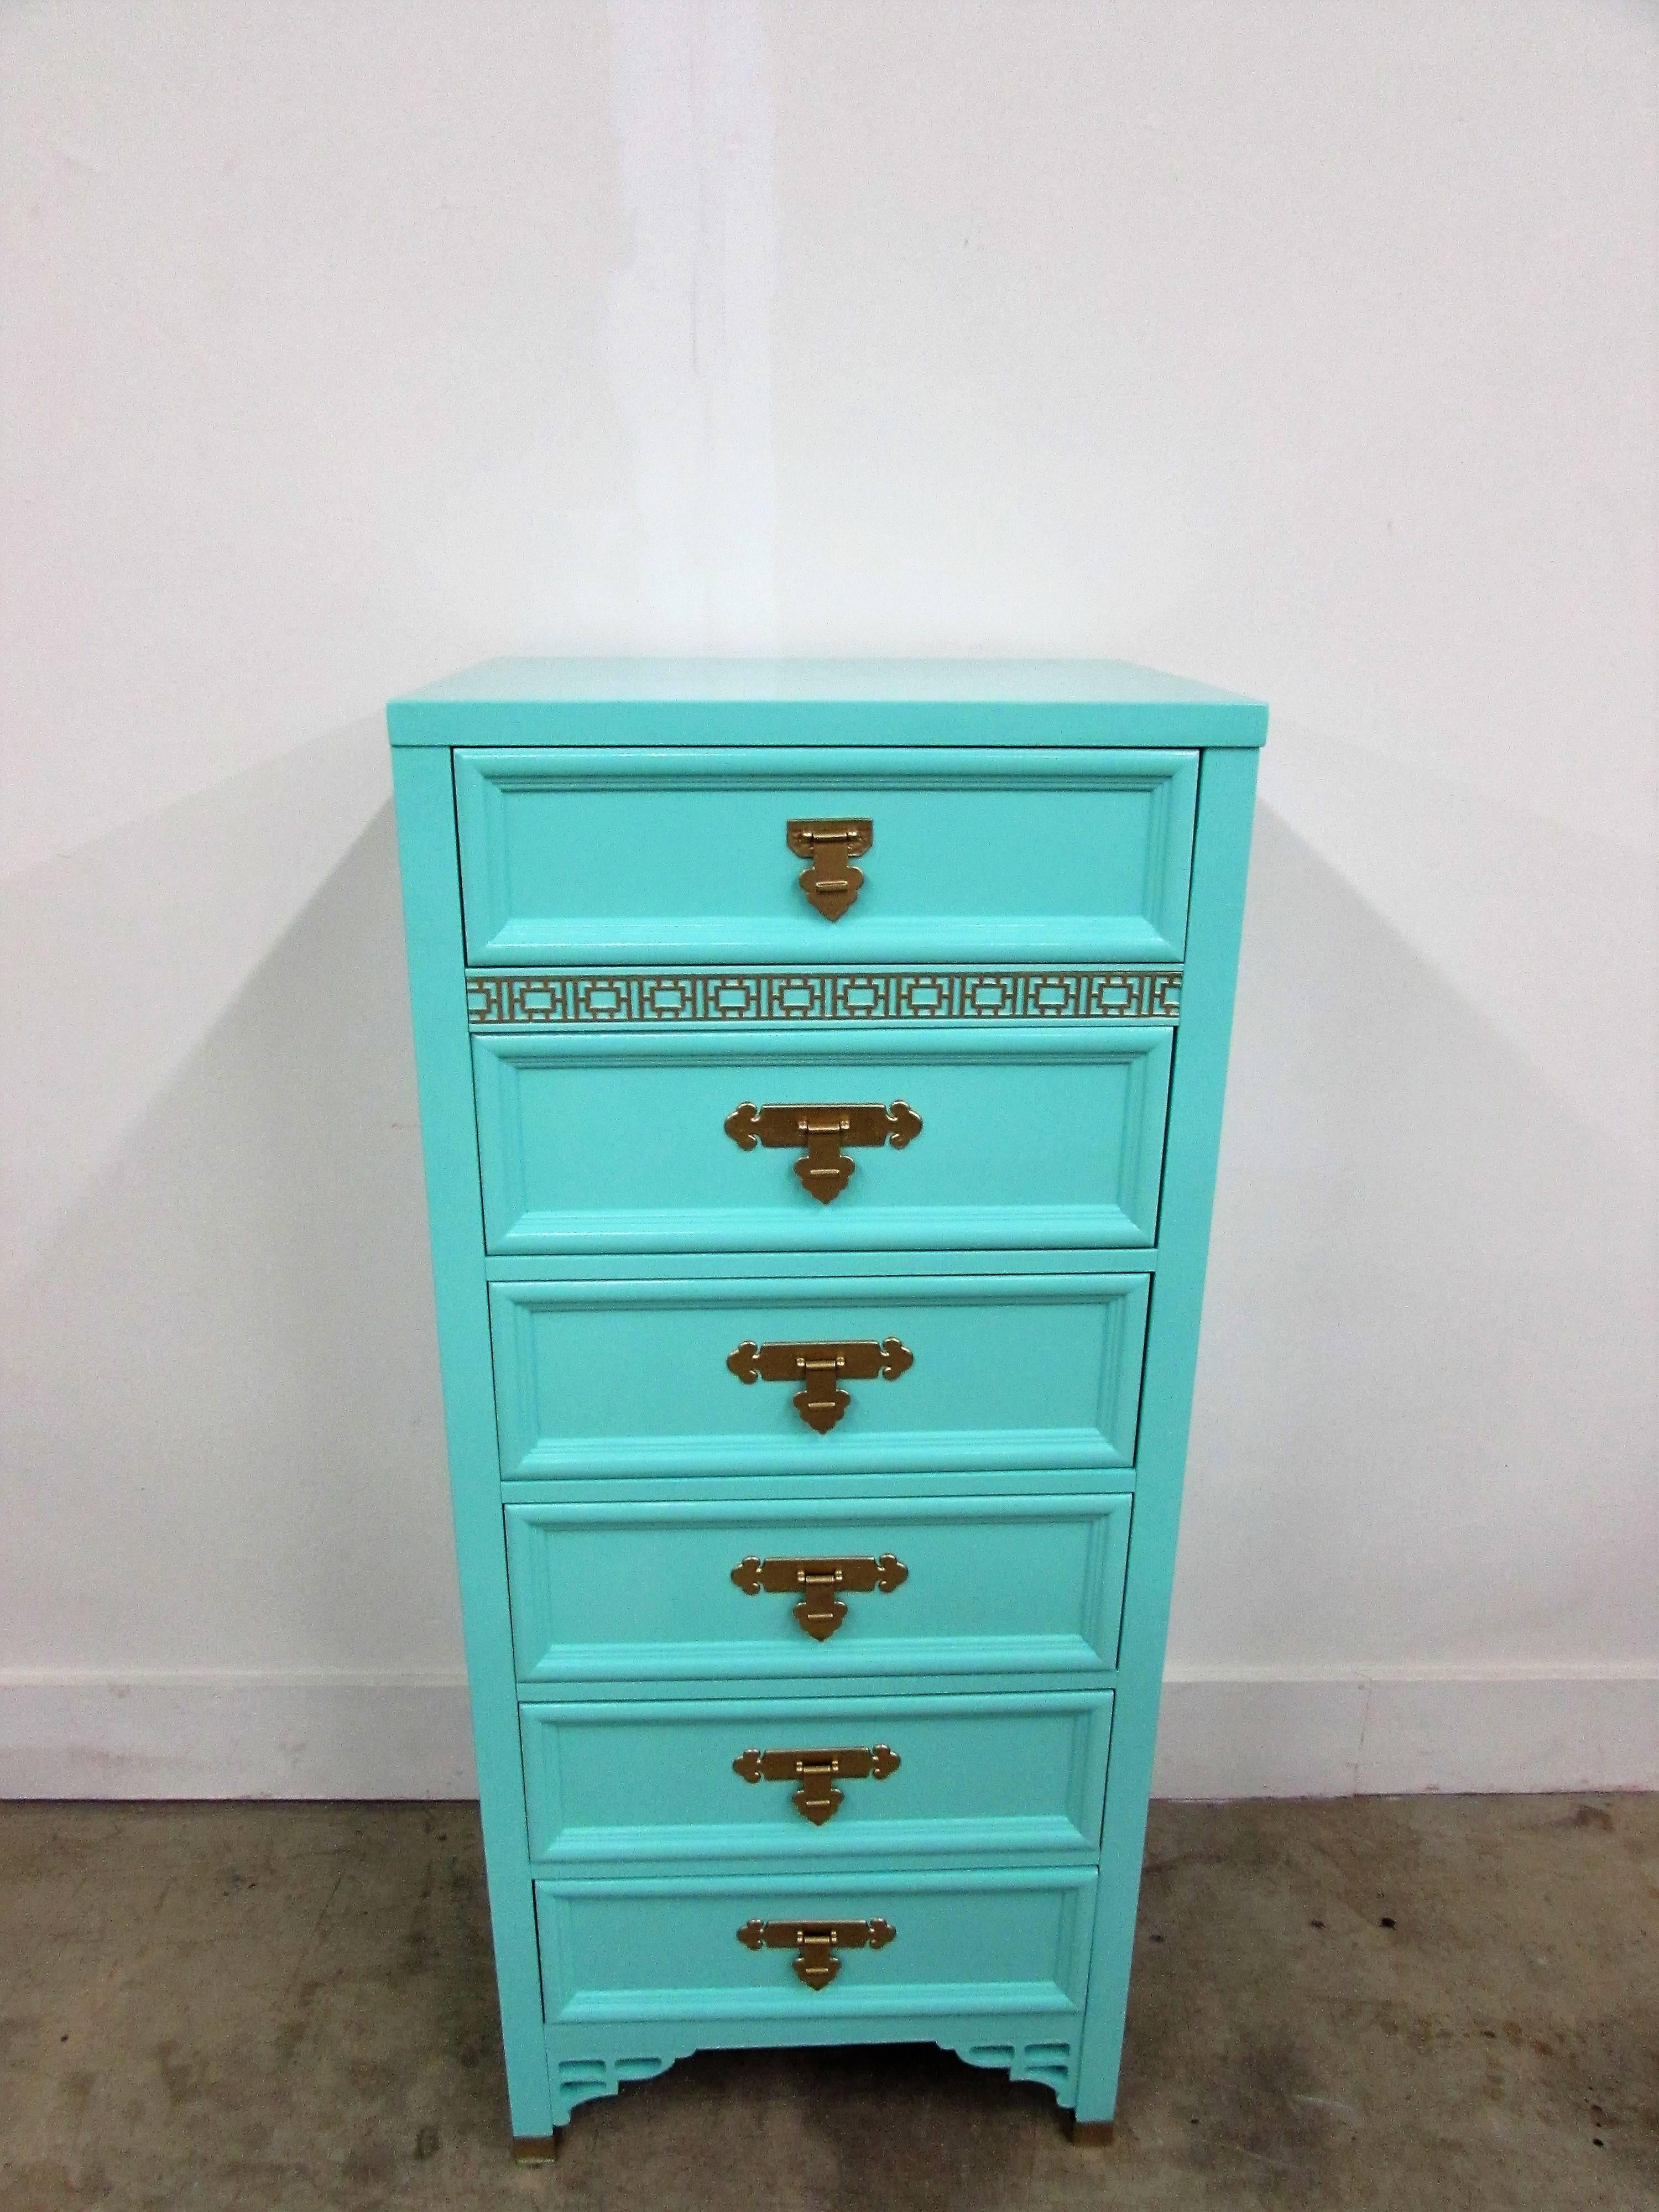 Dixie Shagri-La Lingerie chest lacquered in- house in Benjamin Moore Bermuda teal gloss finish with six dovetail drawers and iconic original brass hardware under our custom gold. Fretwork on all four sides and chinoiserie detail in 18-karat gilding.